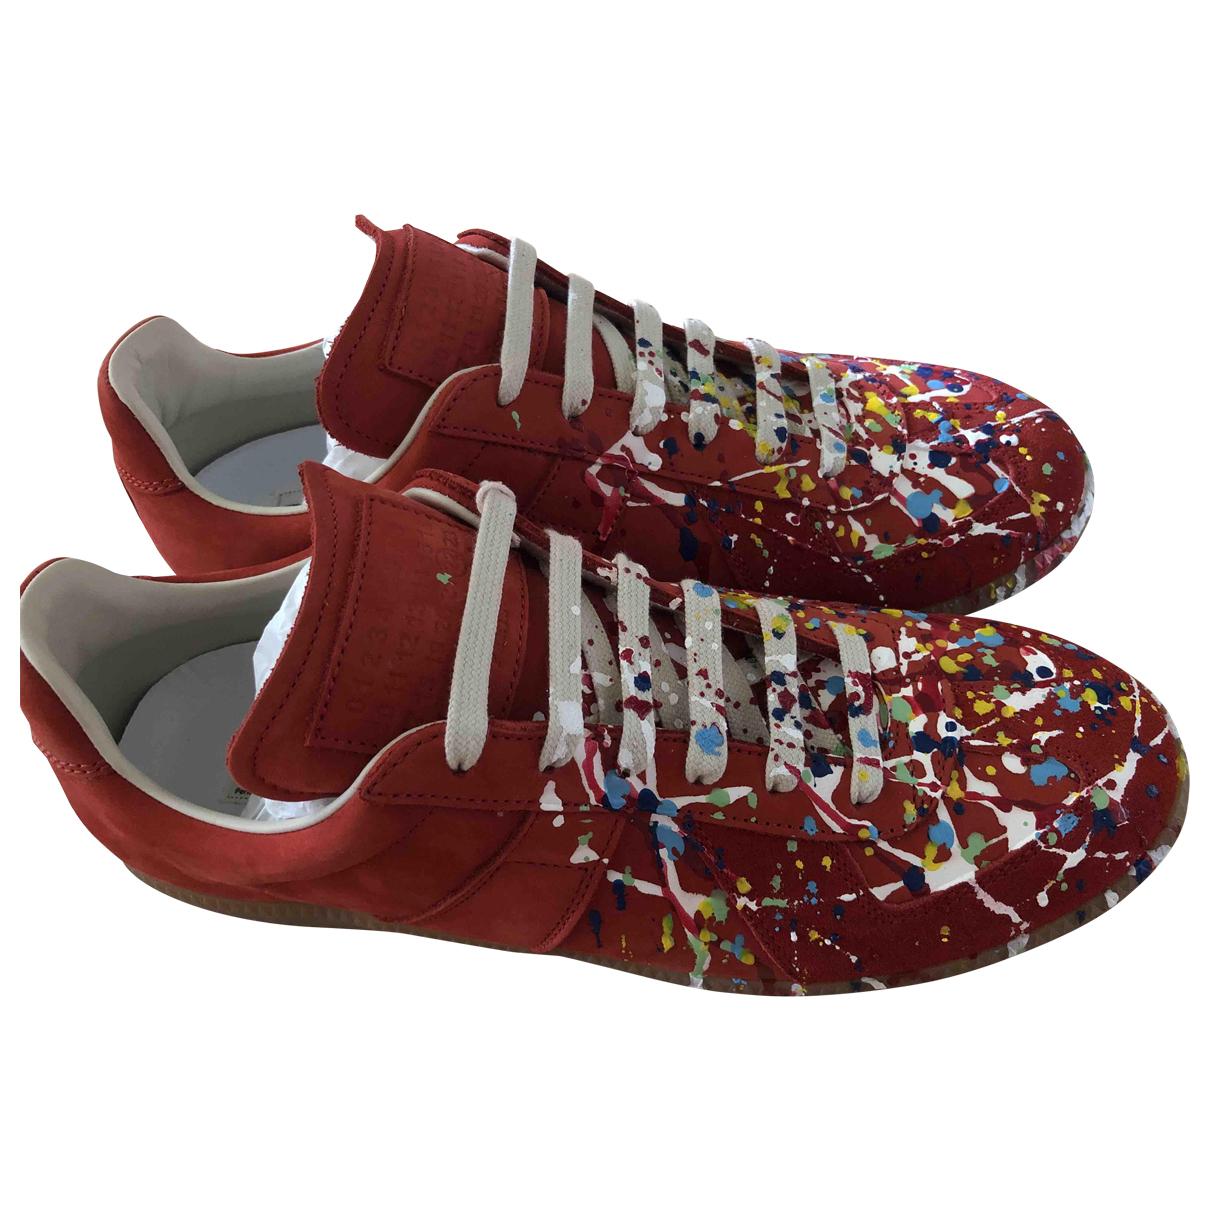 Maison Margiela Replica Leather Low Trainers in Red for Men - Lyst